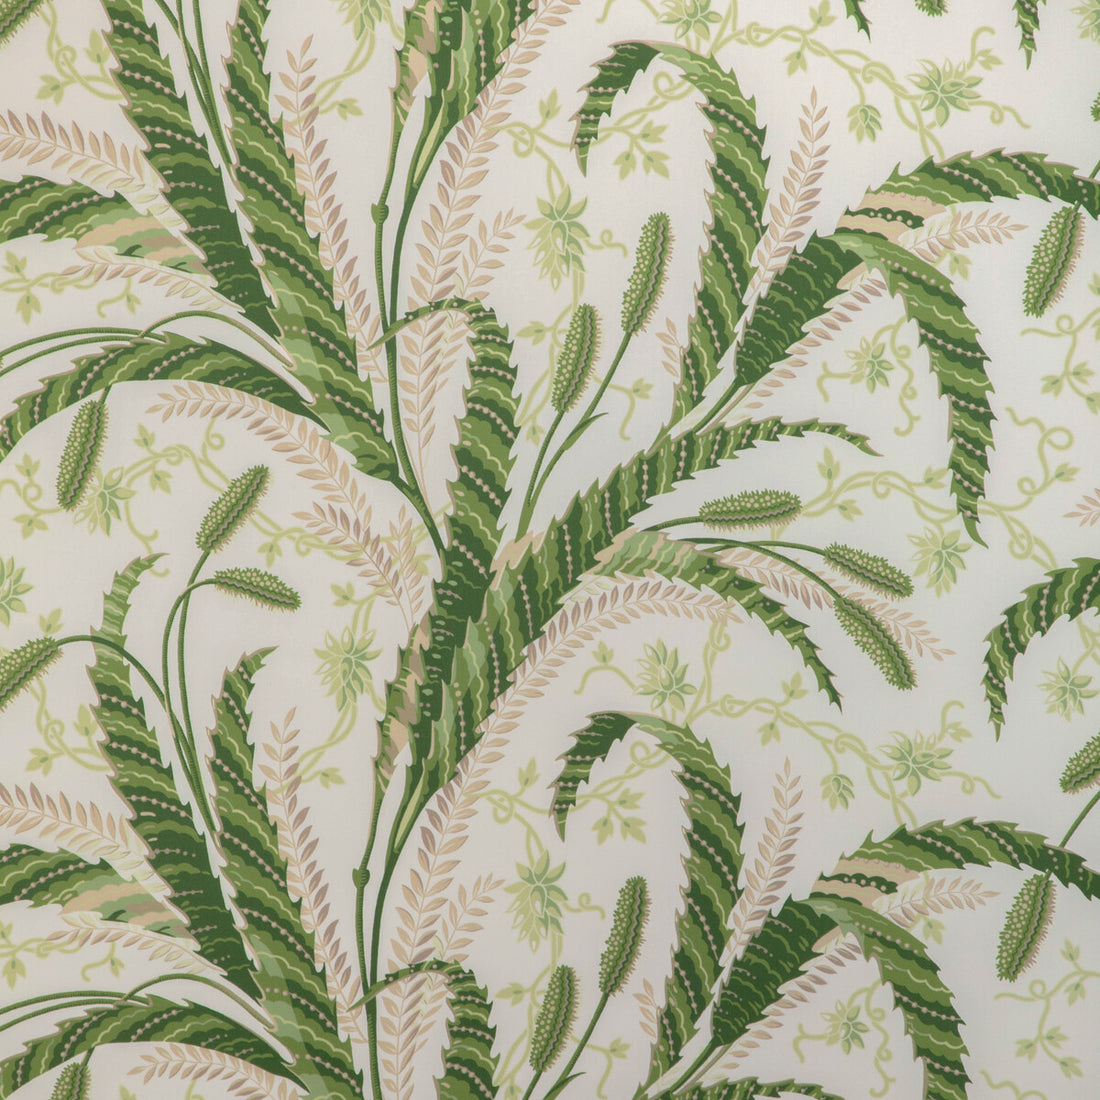 Vernay Print fabric in green color - pattern 8023101.3.0 - by Brunschwig &amp; Fils in the Cadenet collection